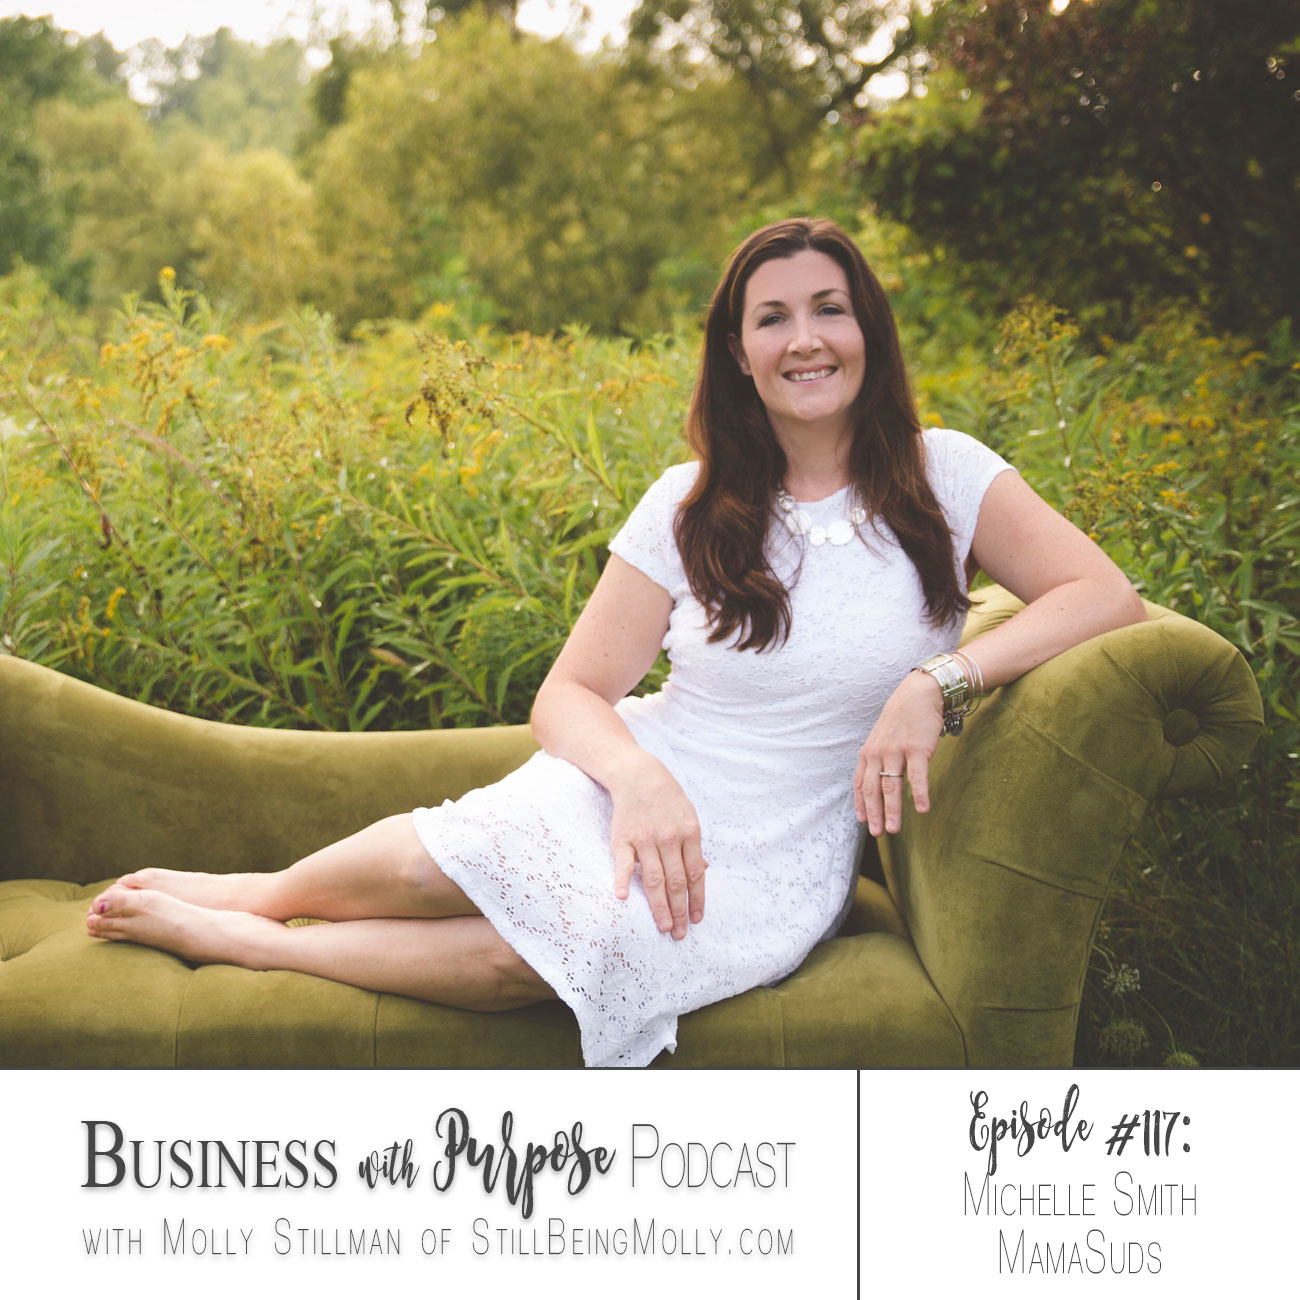 Business with Purpose Podcast EP 117: Michelle Smith, Founder of MamaSuds